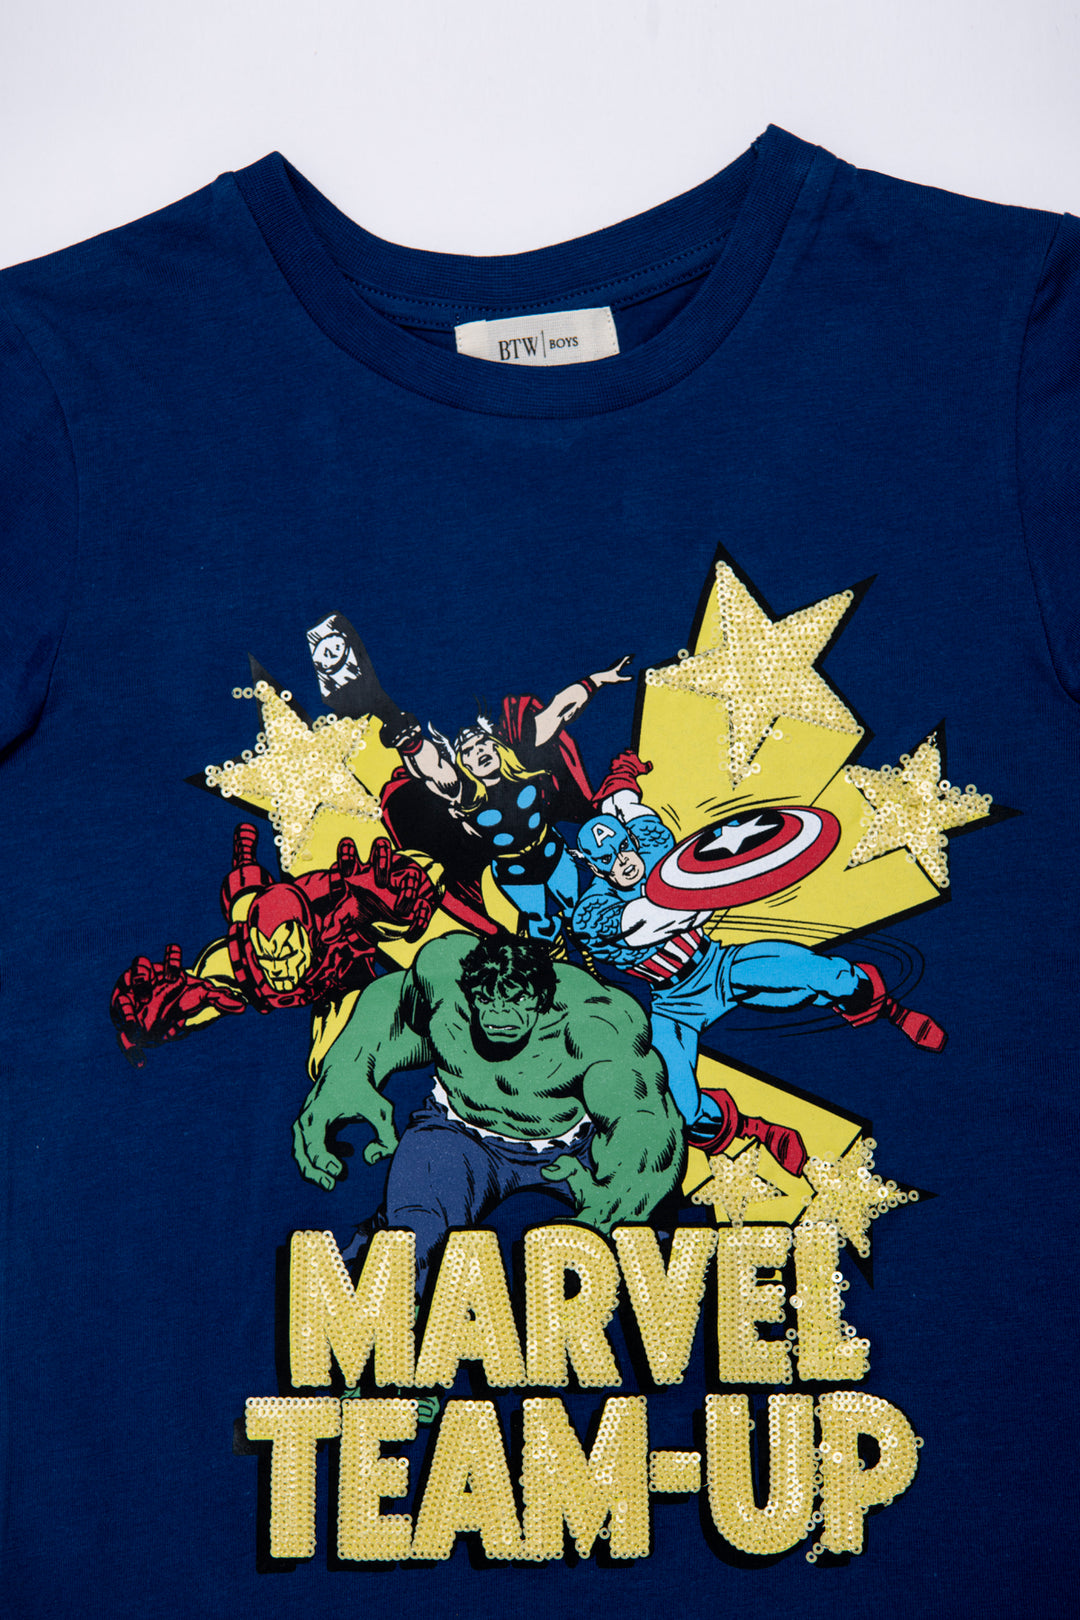 PRINTED MARVEL GRAPHIC & SEQUIN T-SHIRT